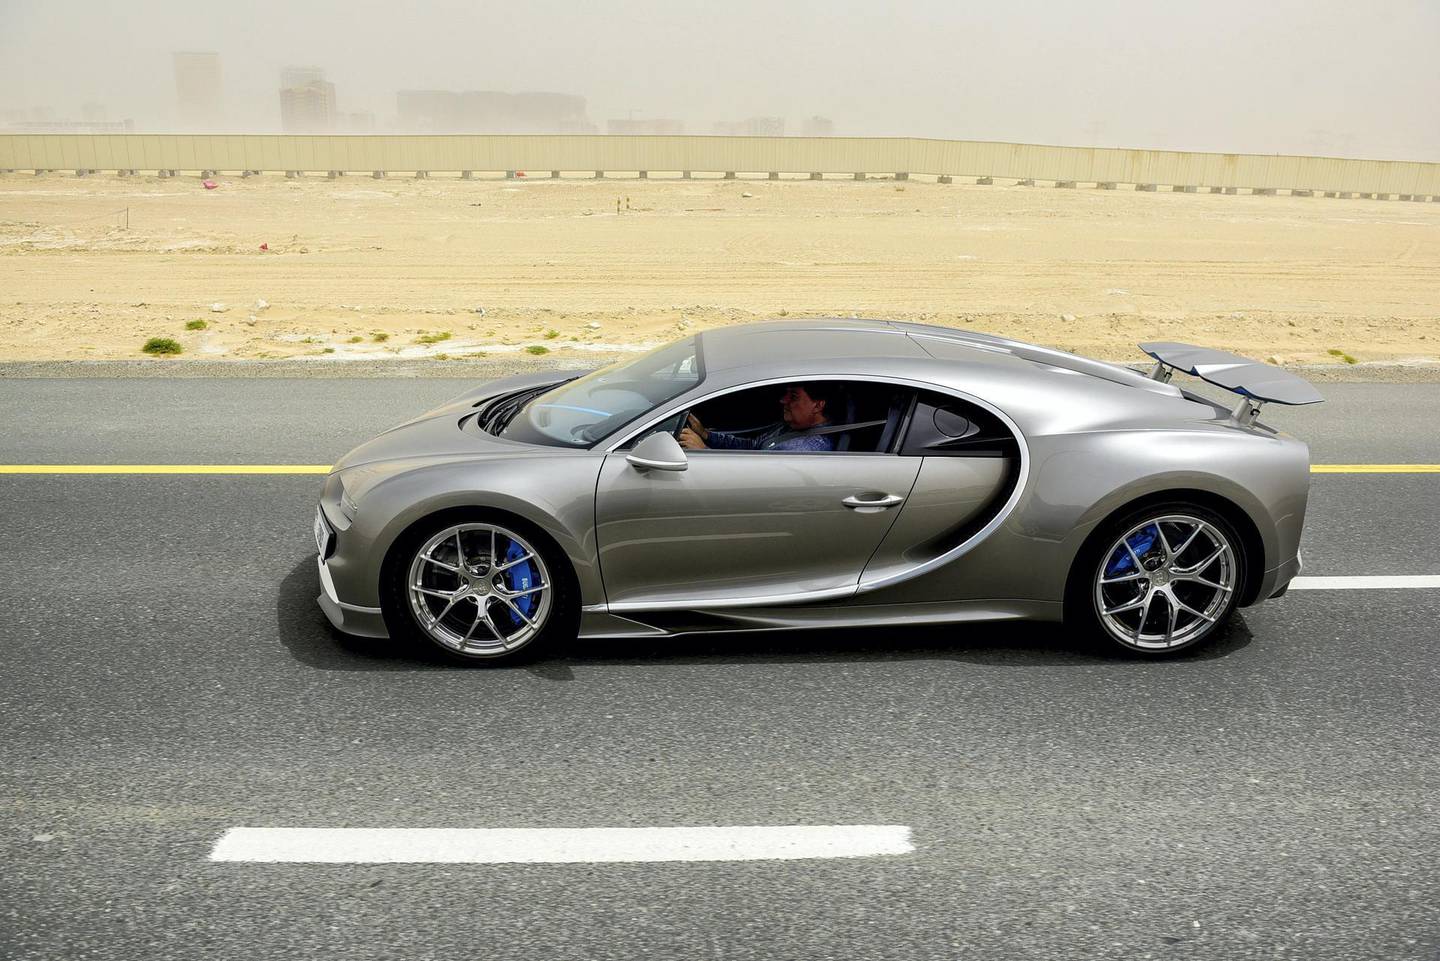 The Chiron Sport has an eight-litre, quad-turbocharged, 16-cylinder engine. Courtesy Bugatti Automobiles S.A.S.